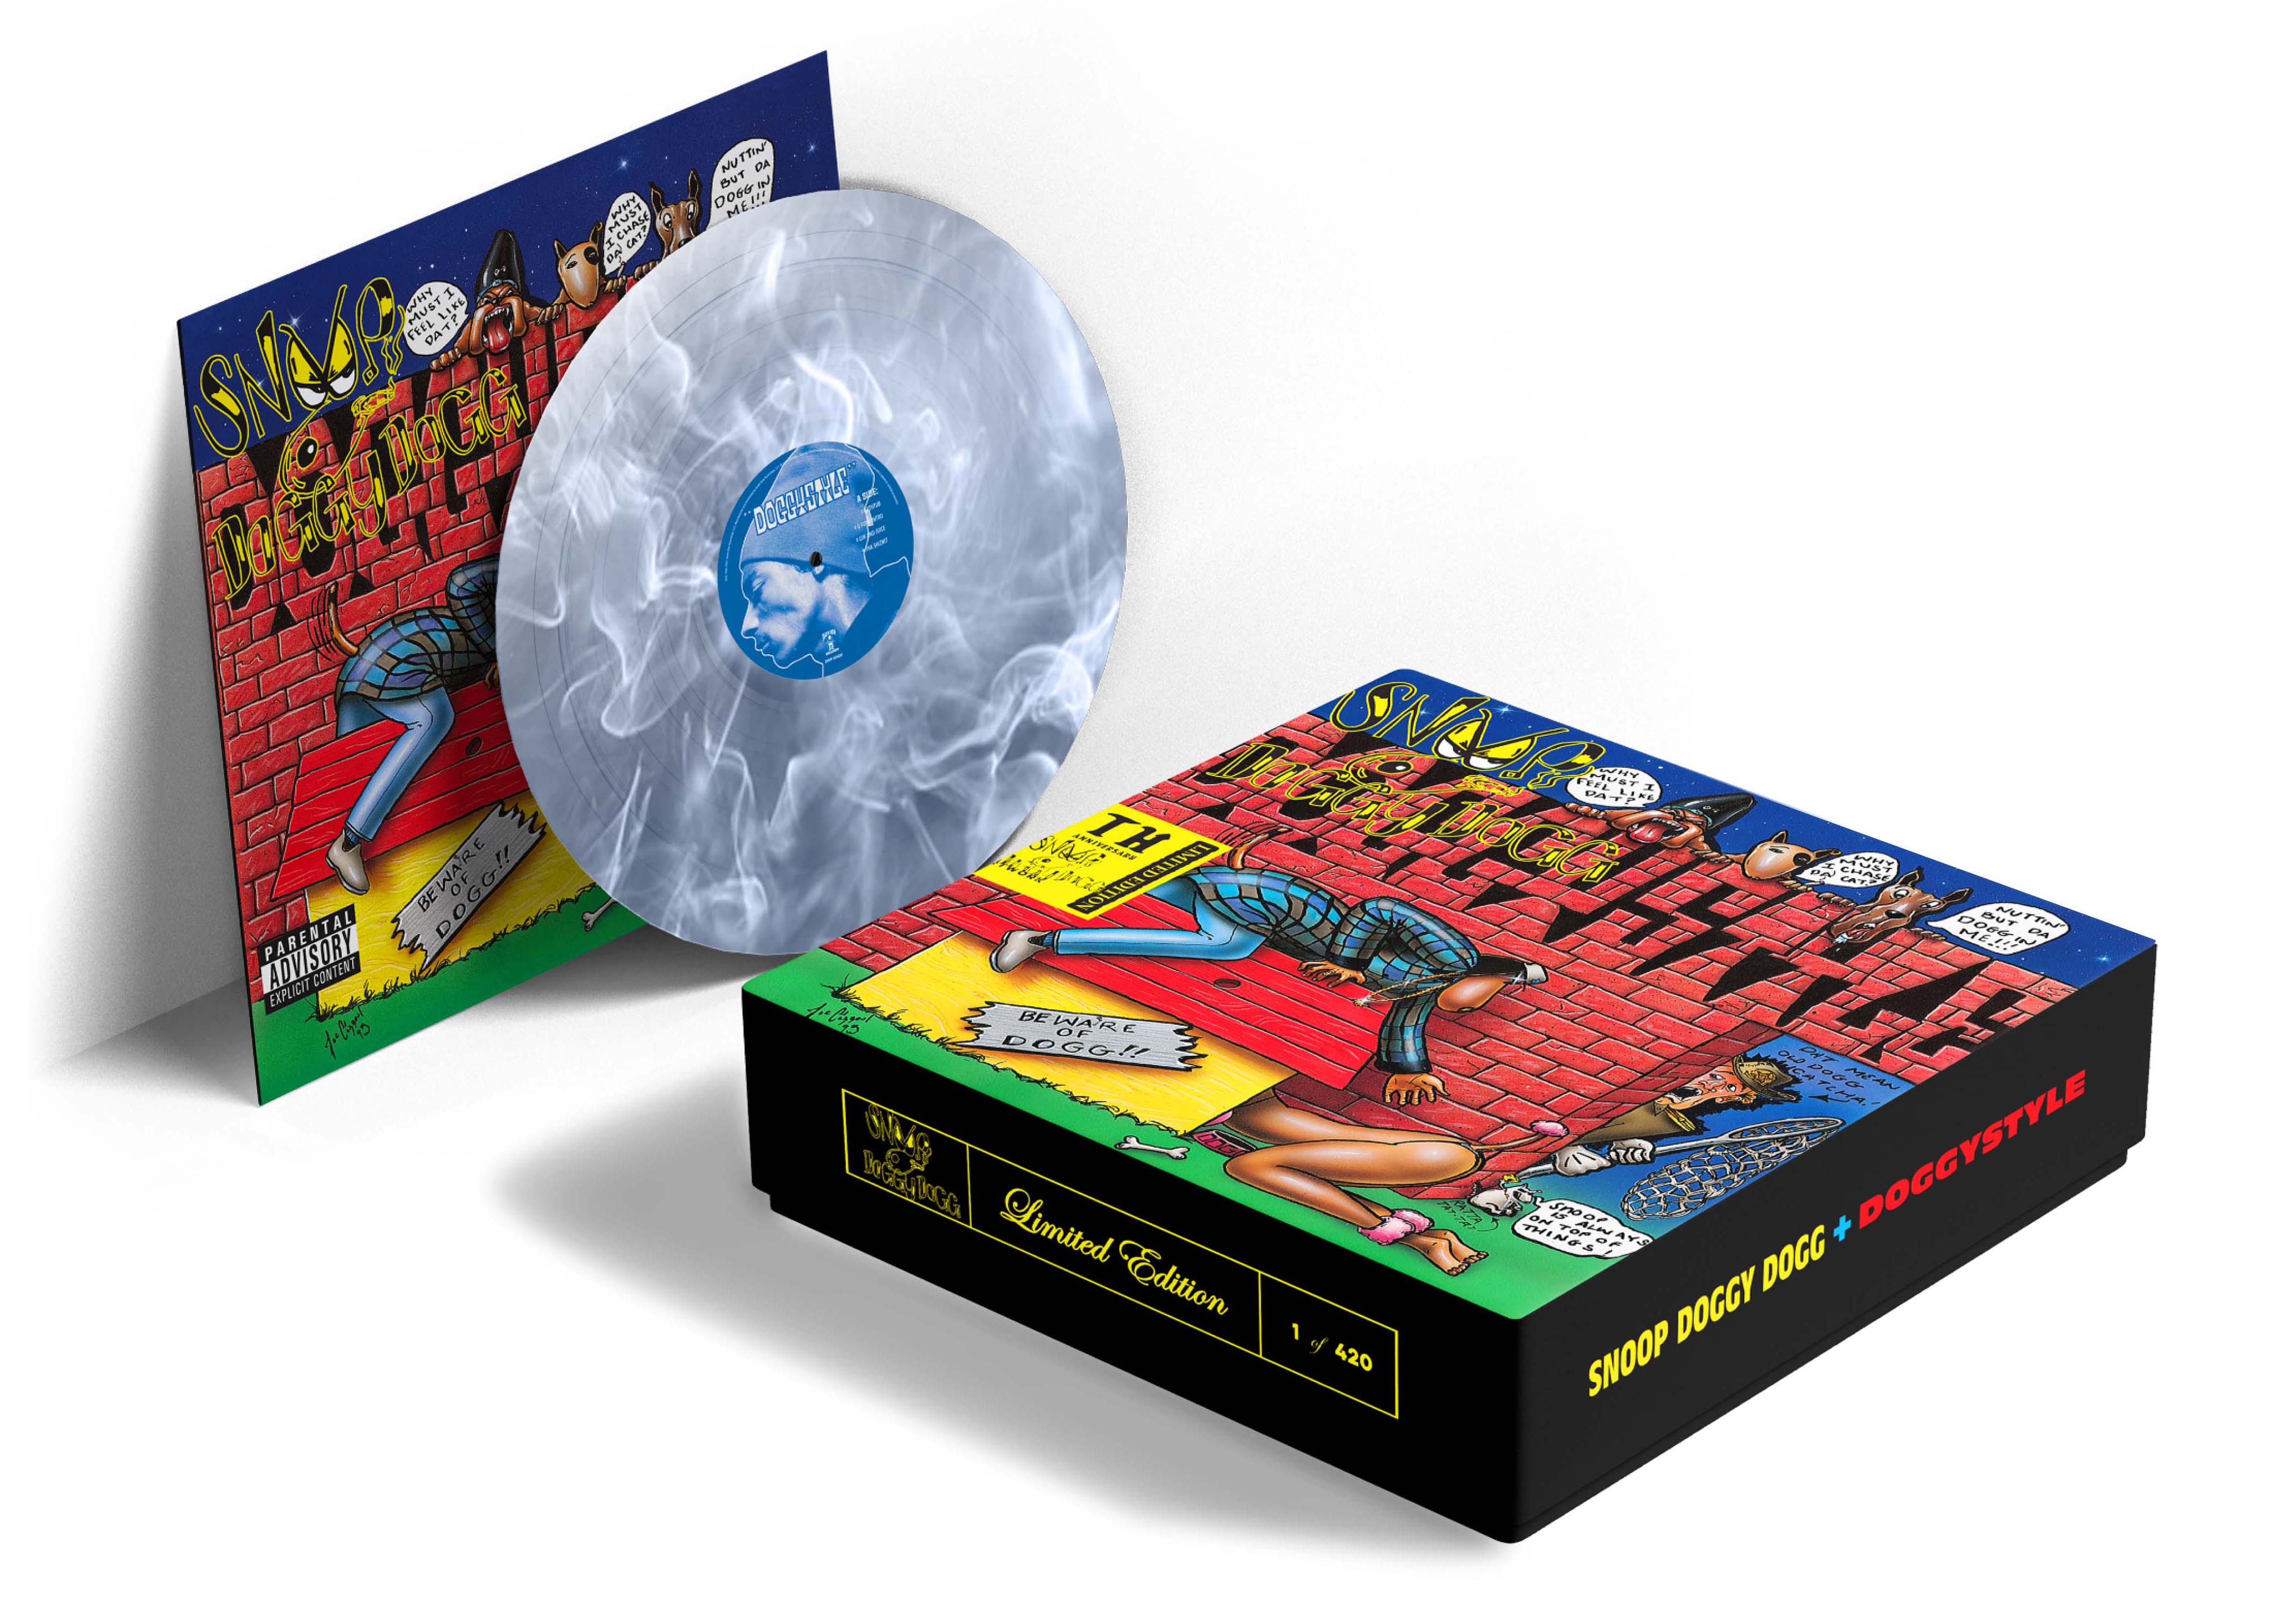 Snoop Dogg Doggystyle 4/20 Limited Edition LP Vinyl Boxset (Edition of 420)  White Smoke